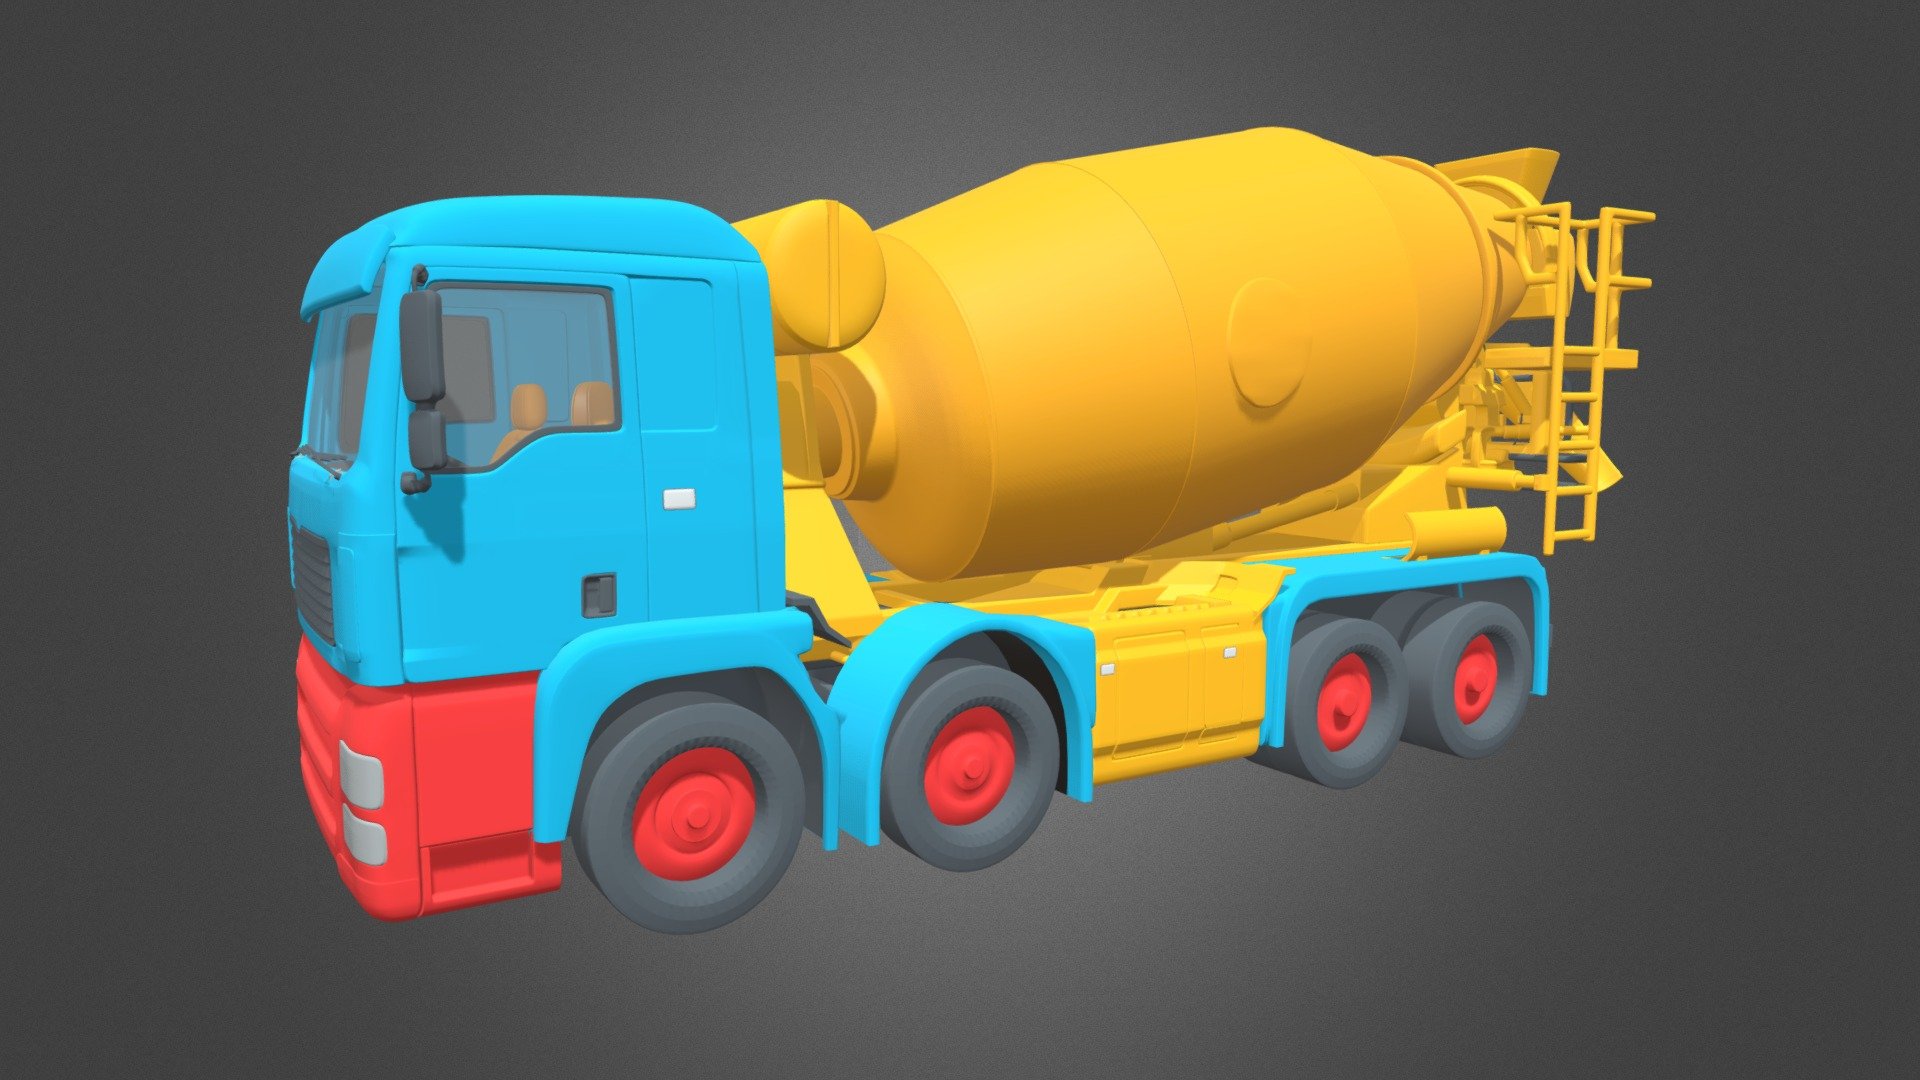 Concrete Mixer Truck
Originally created with 3ds Max 2015 and rendered in Mental Ray

Without Meshsmooth
Poly Count = 92447
Vertex Count = 95887

With Turbosmooth (Itera :1)
Poly Count = 738372
Vertex Count = 376523 - Concrete Mixer Truck - 3D model by nuralam018 3d model